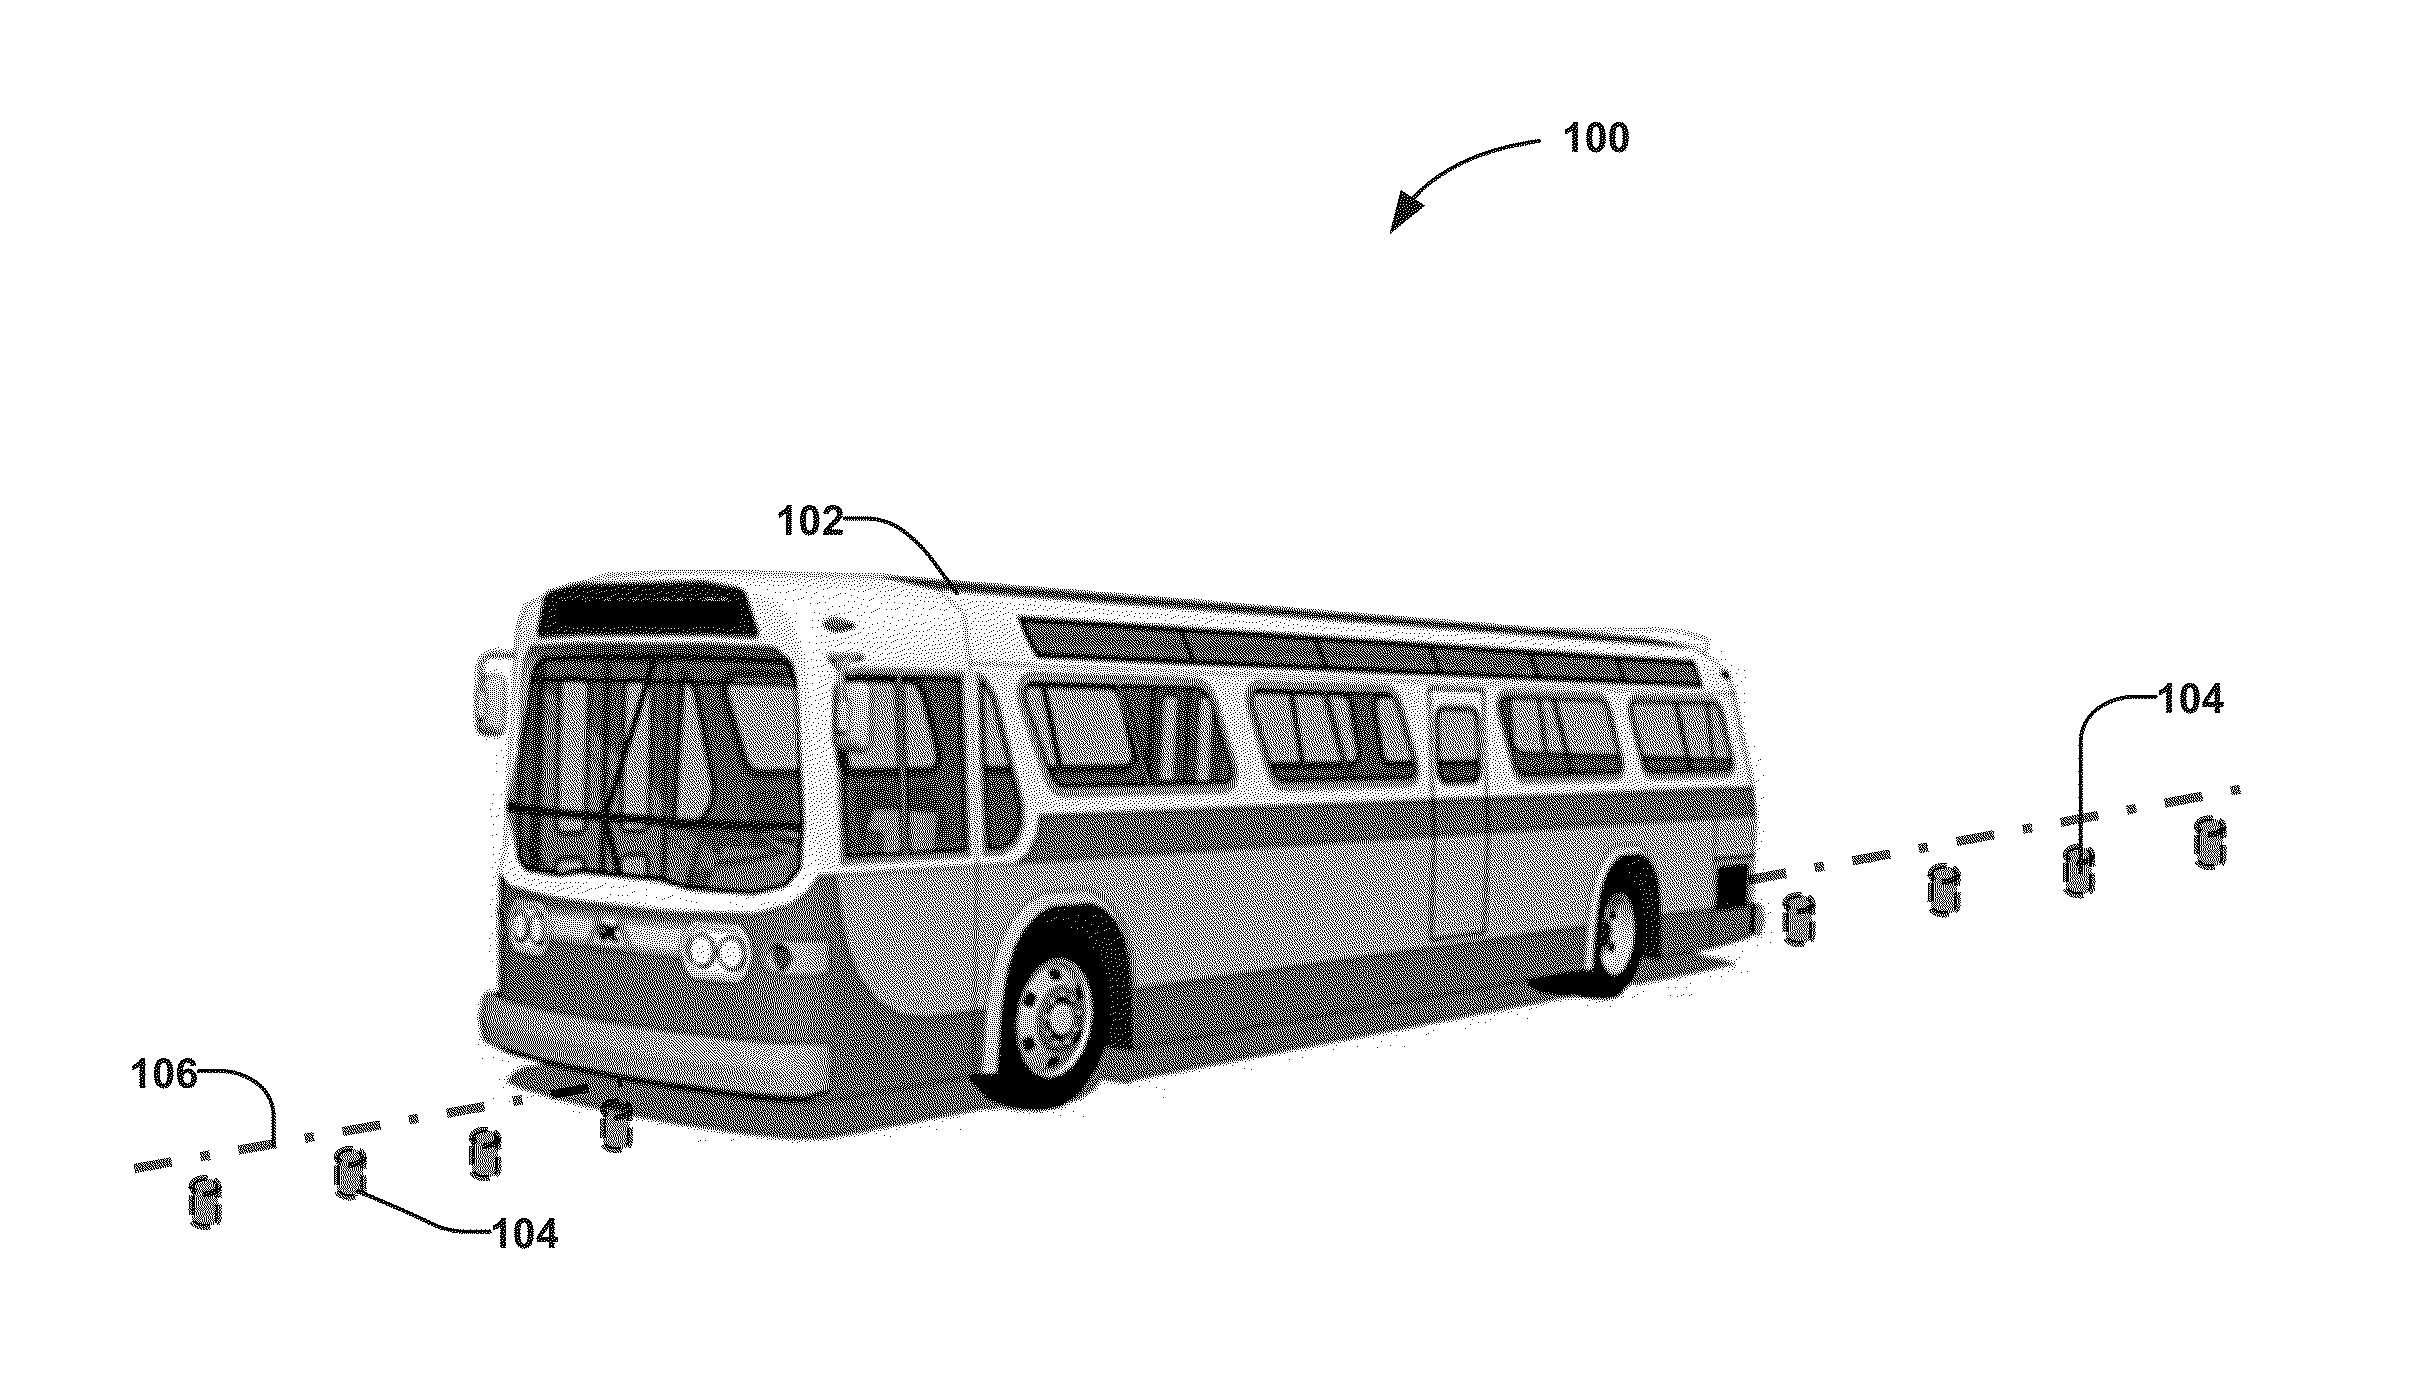 Trip planning and management methods for an intelligent transit system with electronic guided buses